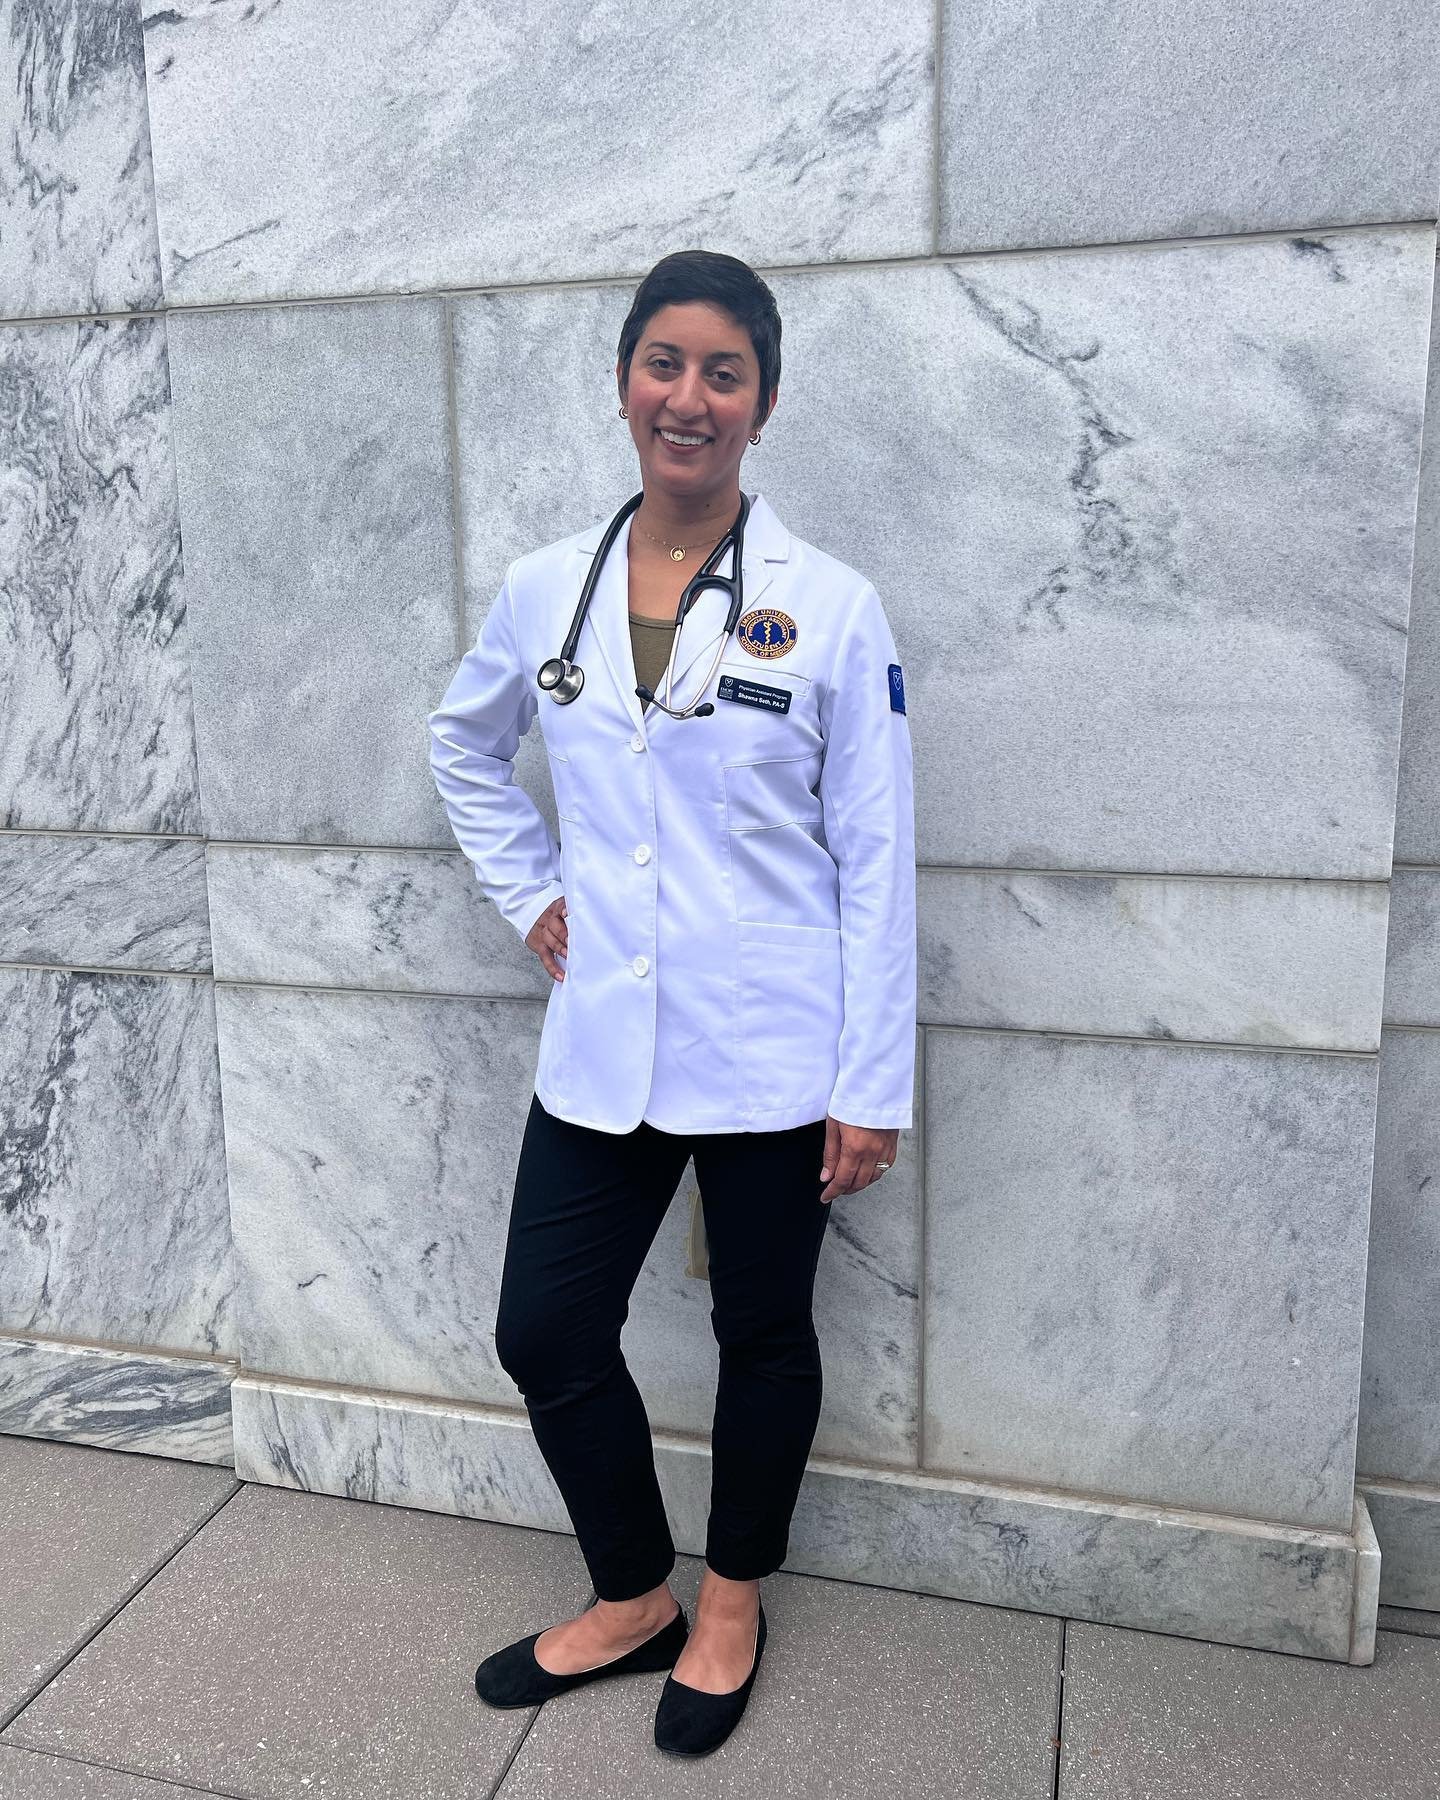 Happy PA week! My first one as a student kicked off on Friday with our first white coat OSCE: a graded exercise involving a simulated clinical visit in a room that looks just like a medical office. 
.
This one was for the first half of a comprehensiv